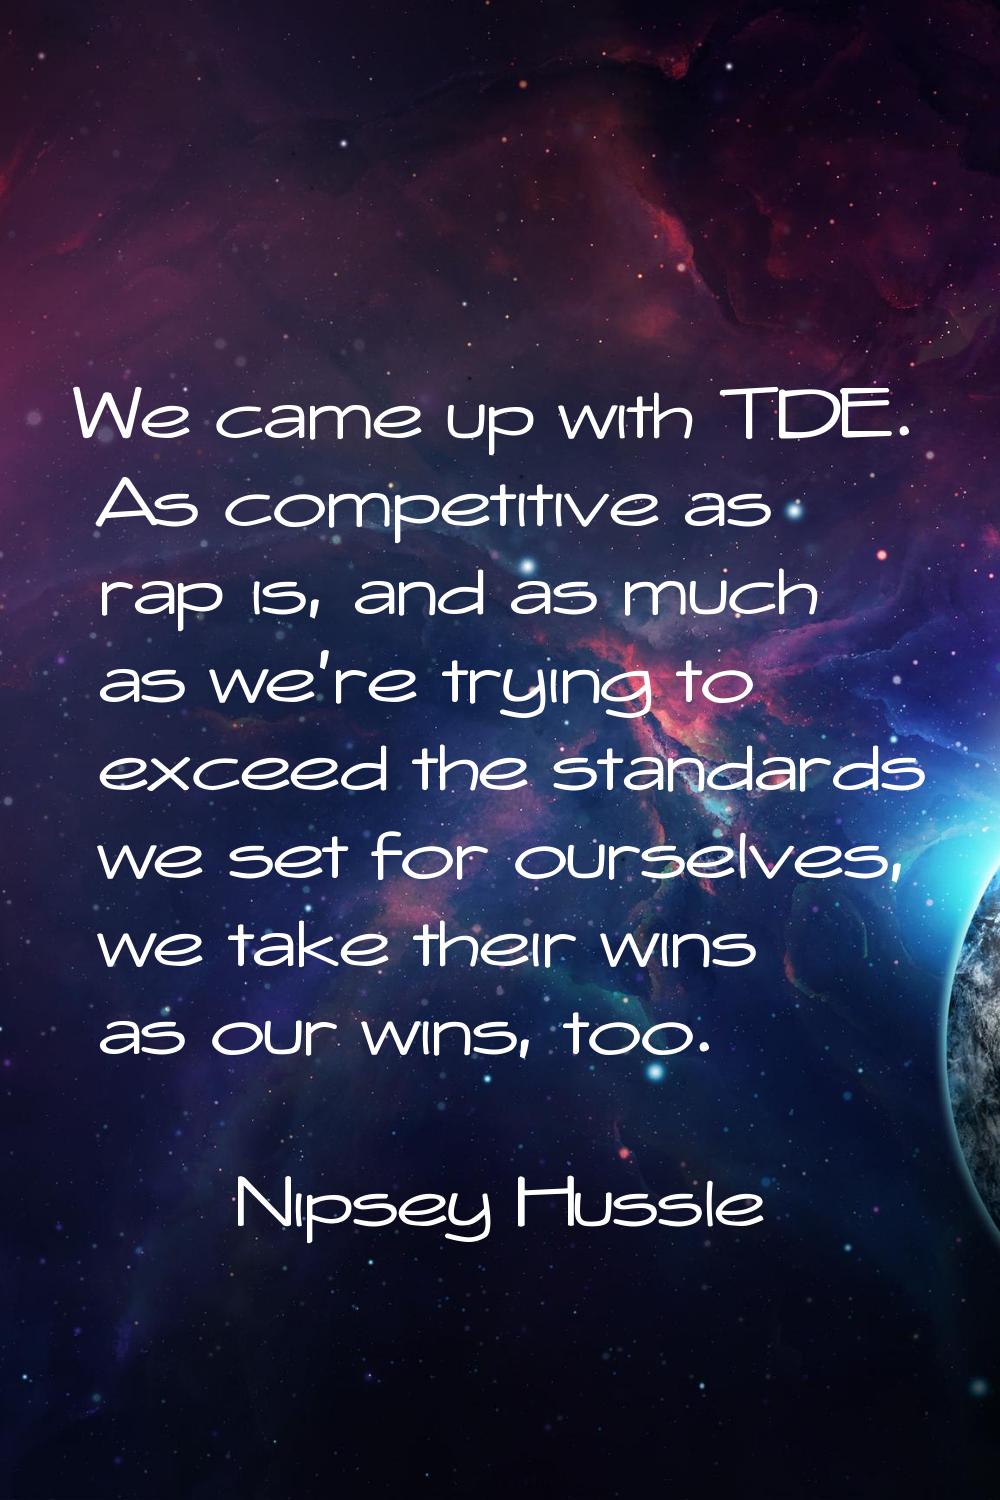 We came up with TDE. As competitive as rap is, and as much as we're trying to exceed the standards 